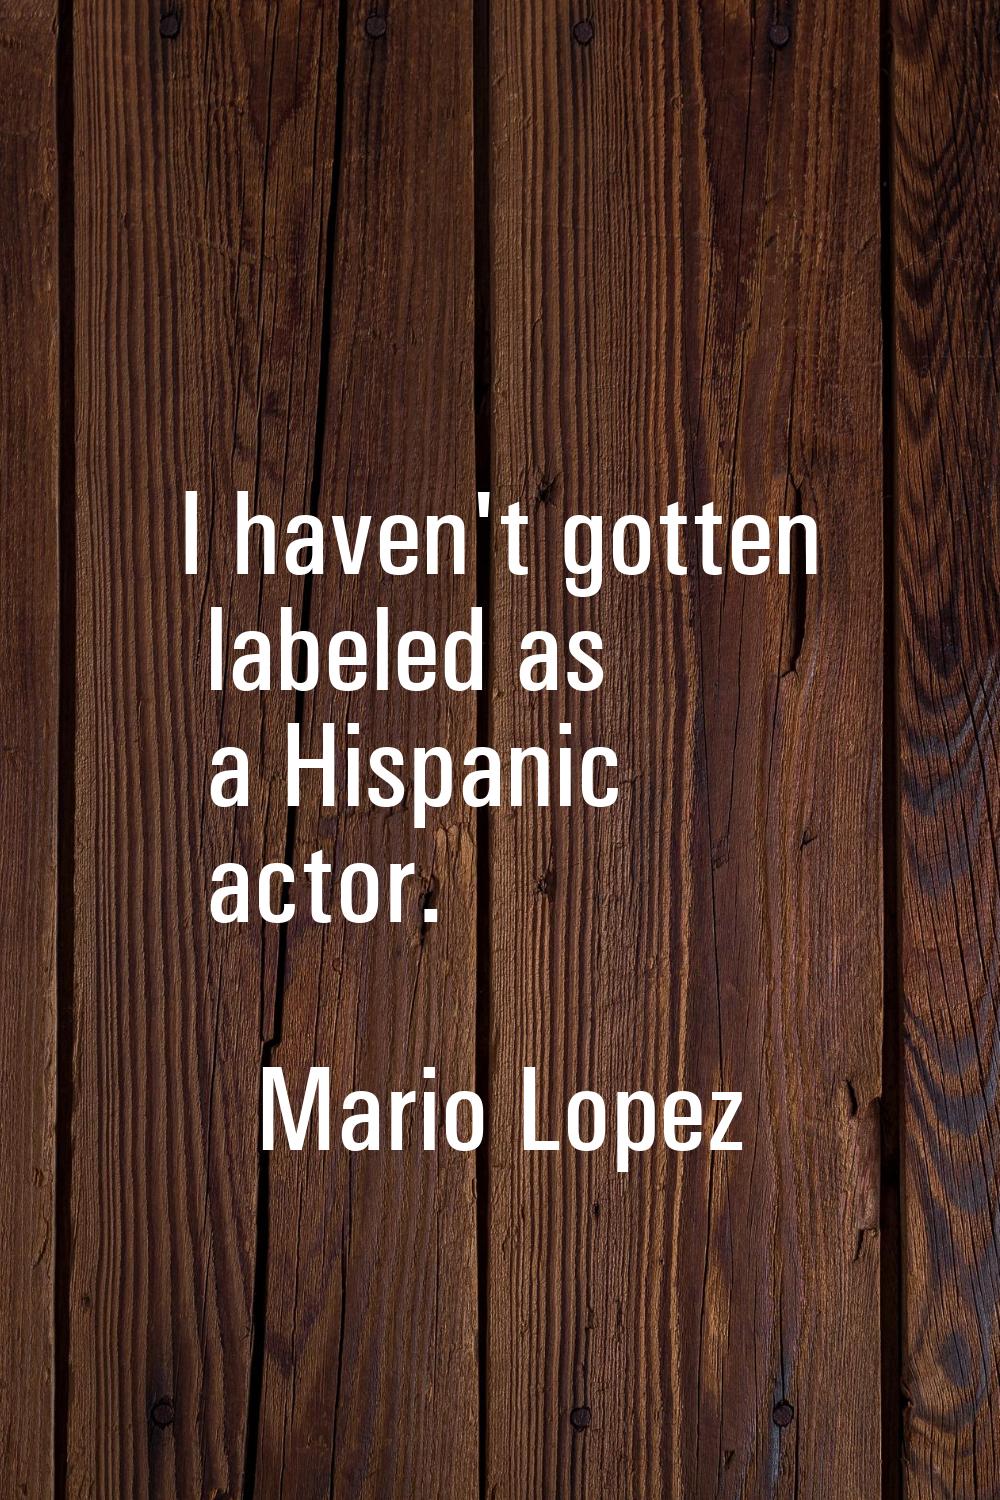 I haven't gotten labeled as a Hispanic actor.